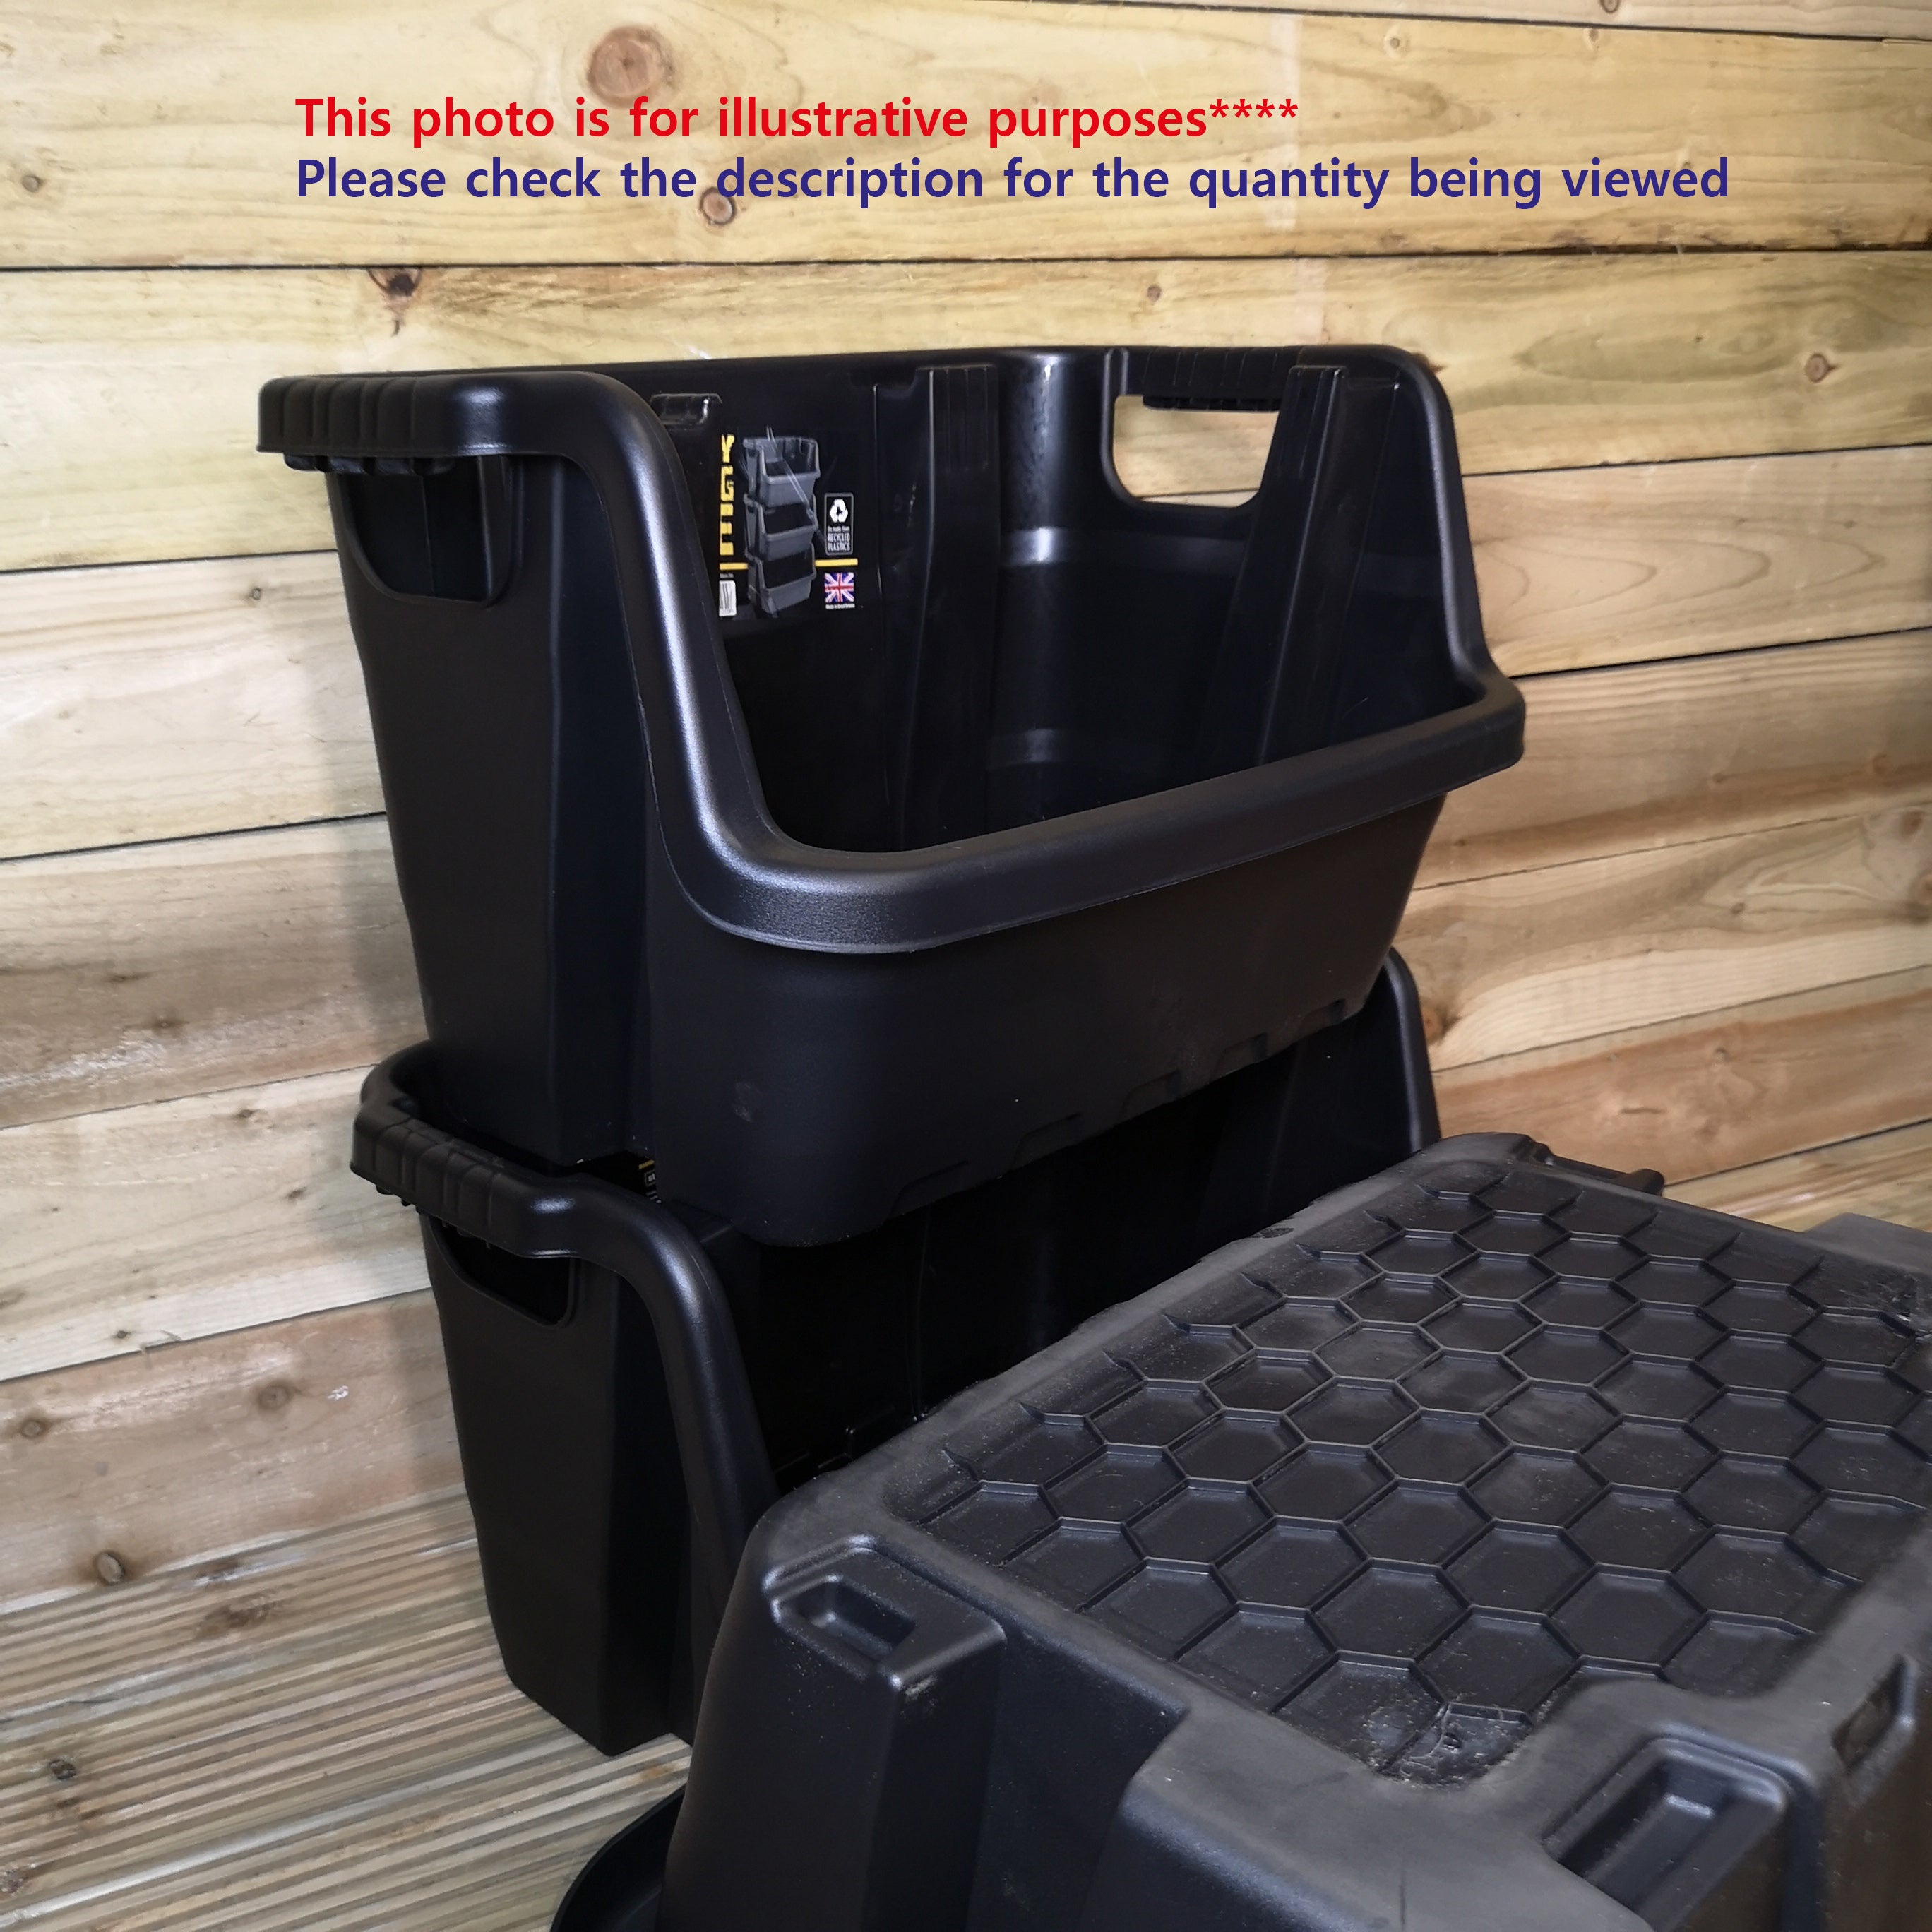 Pack of 3 / 59 x 41 x 36cm Heavy Duty Plastic Stackable Crates / Pick Bins with Handles